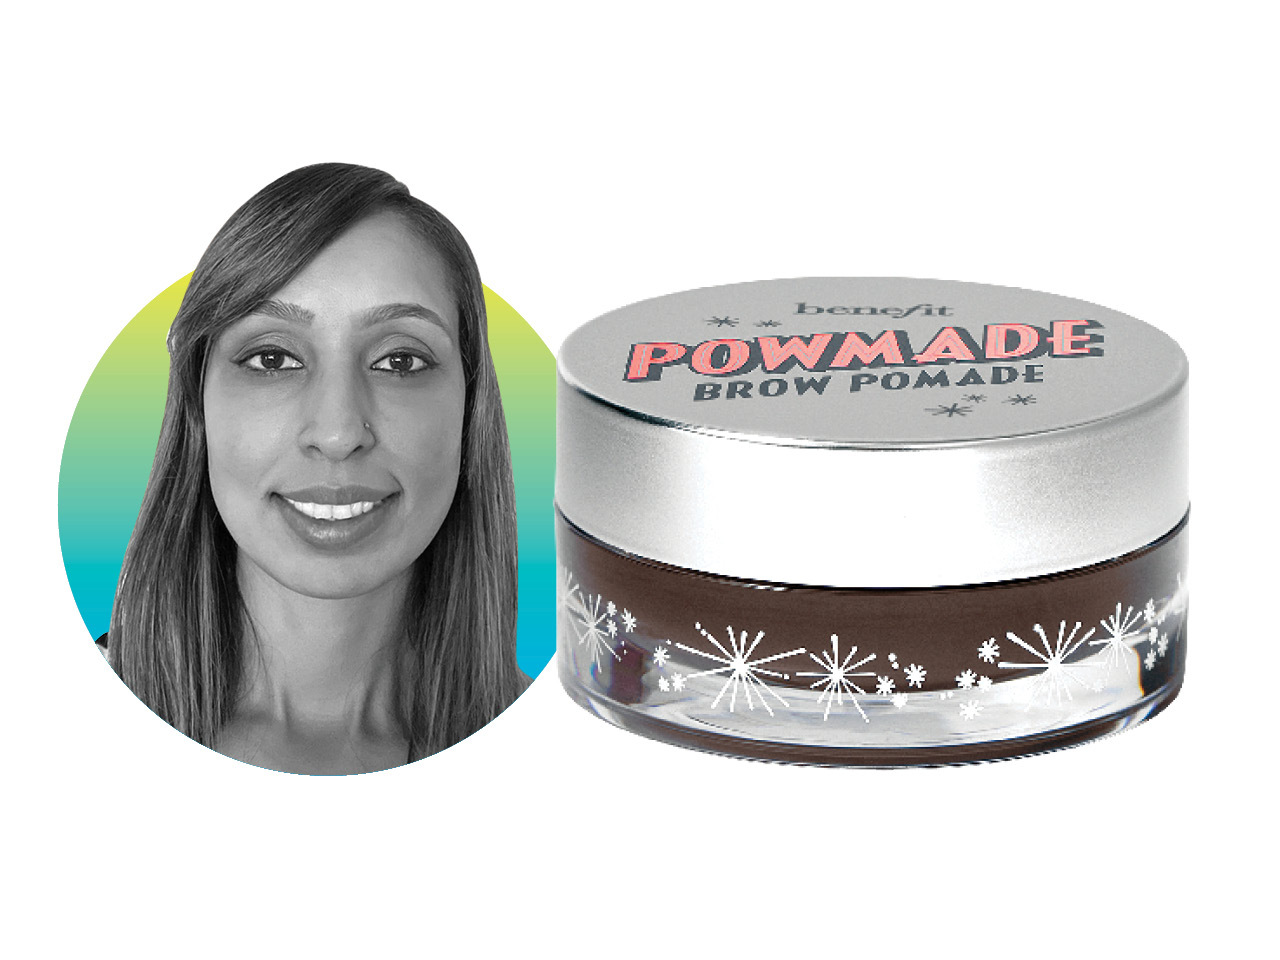 A Chatelaine reader reviews the Benefit Cosmetics Brow Powmade.